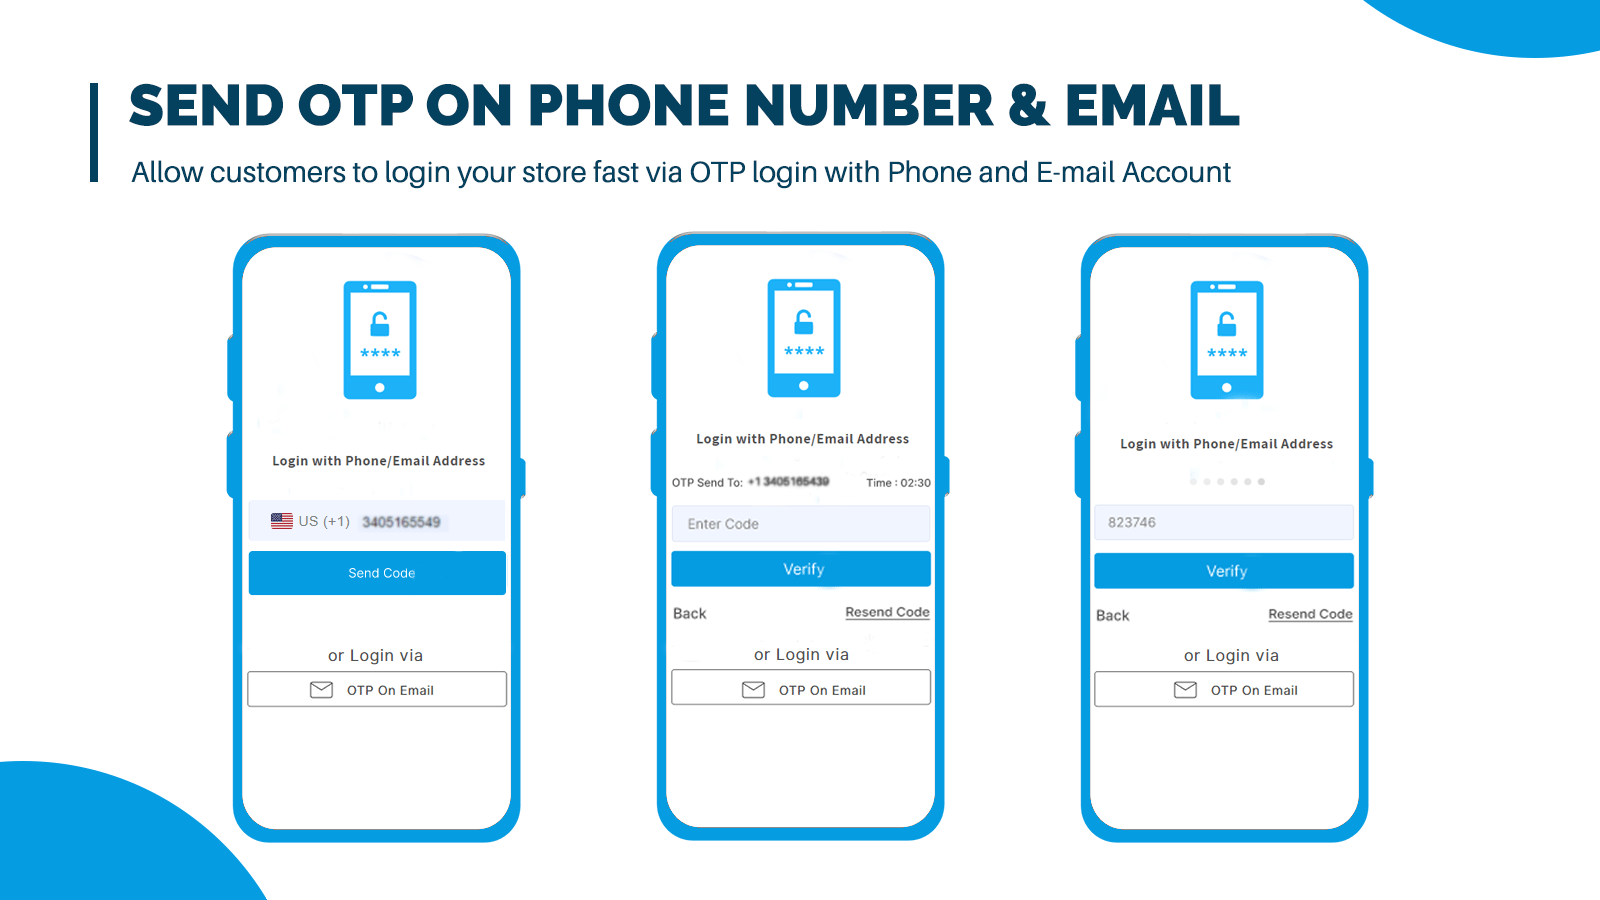 send otp and login with phone email address